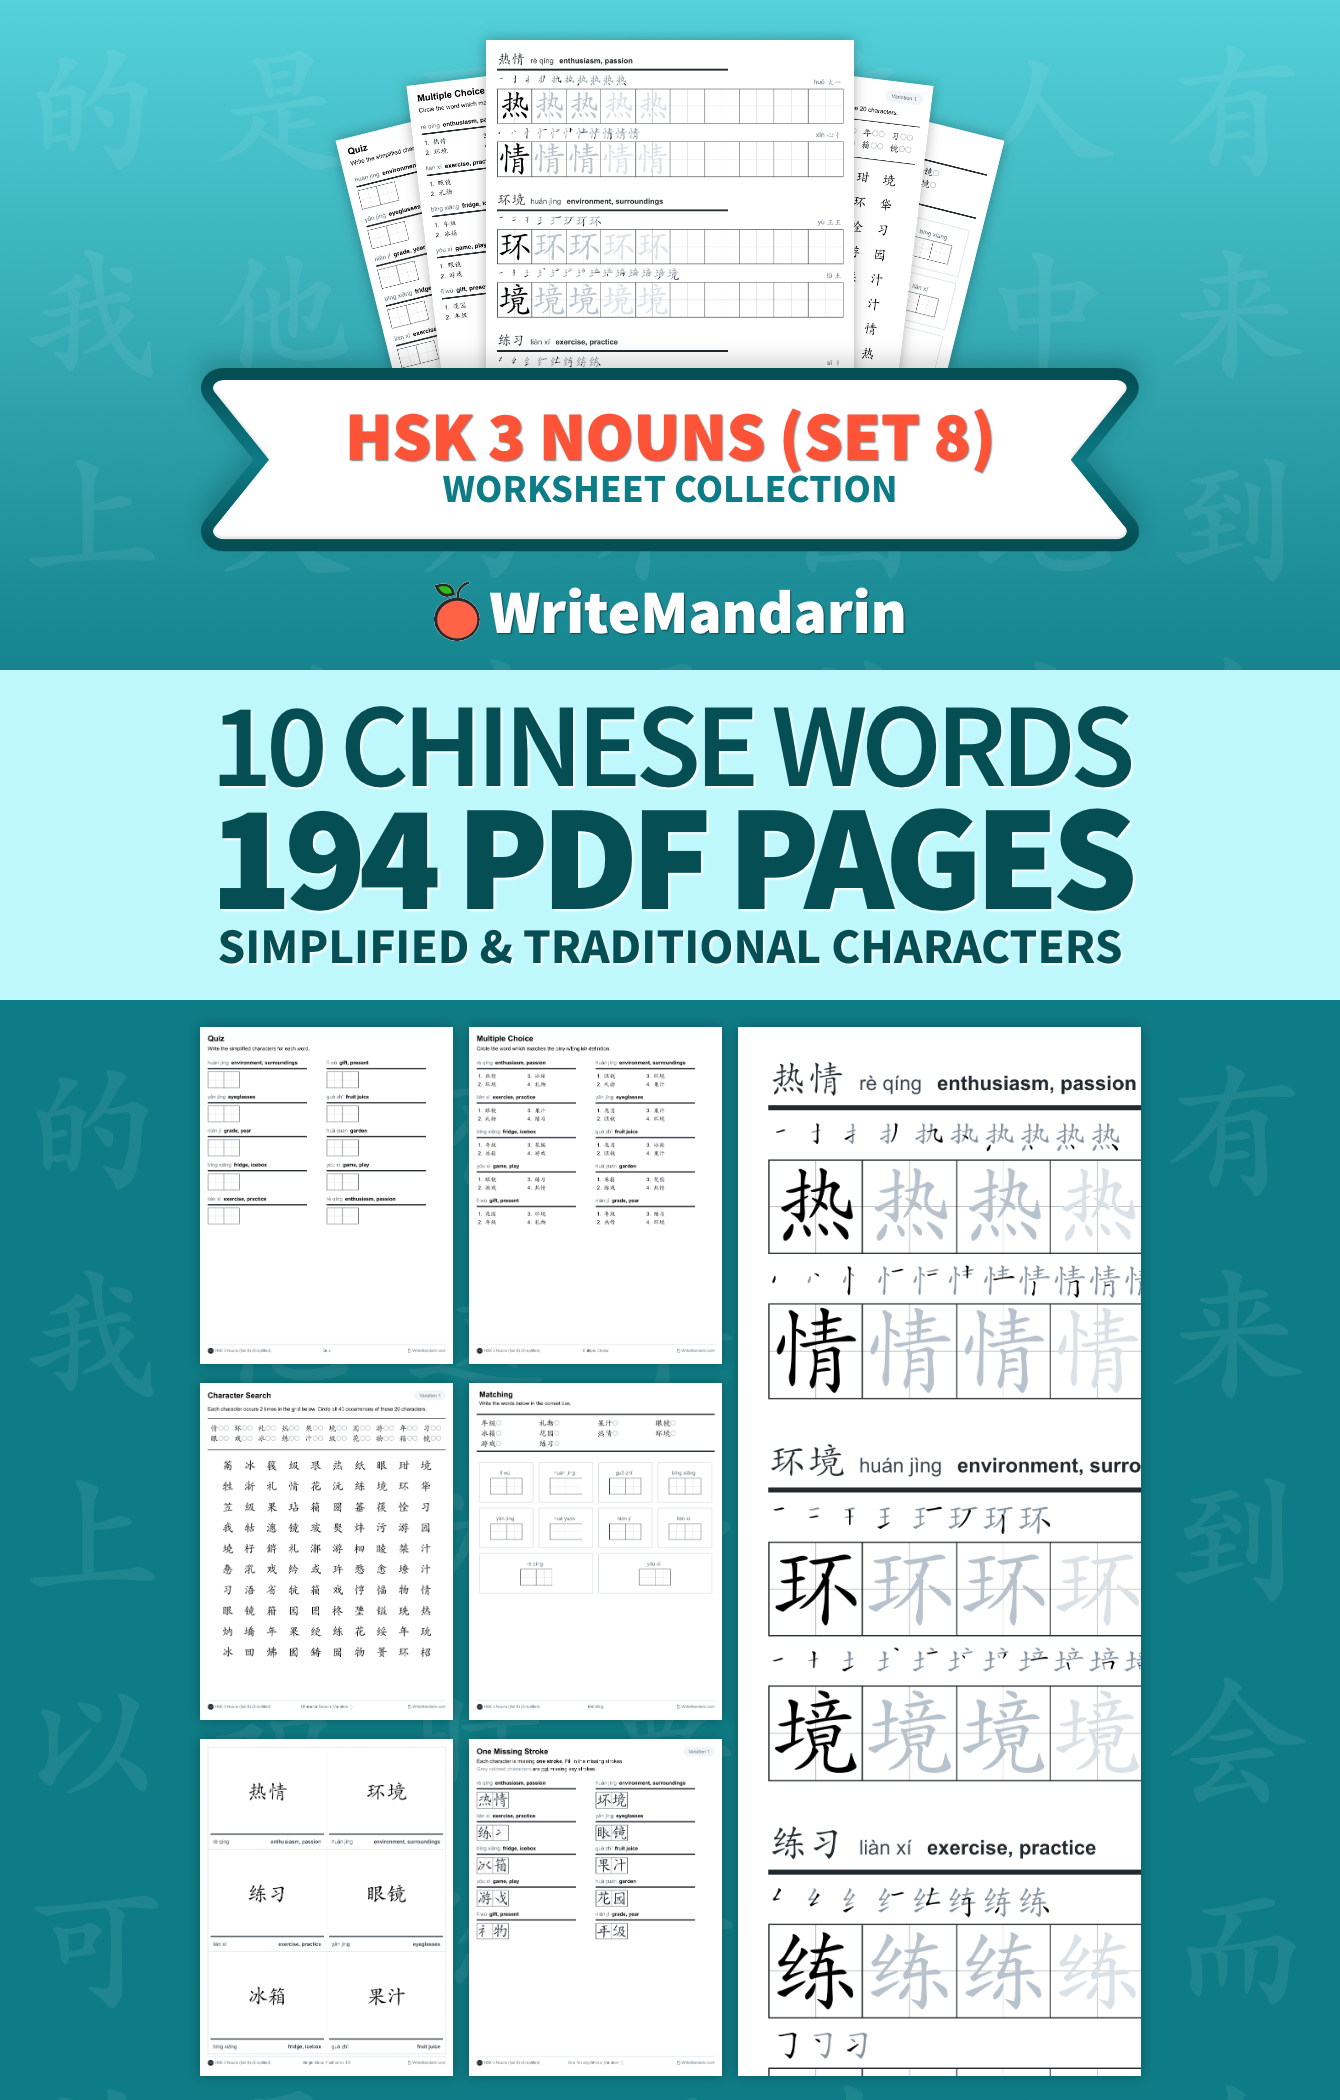 Preview image of HSK 3 Nouns (Set 8) worksheet collection